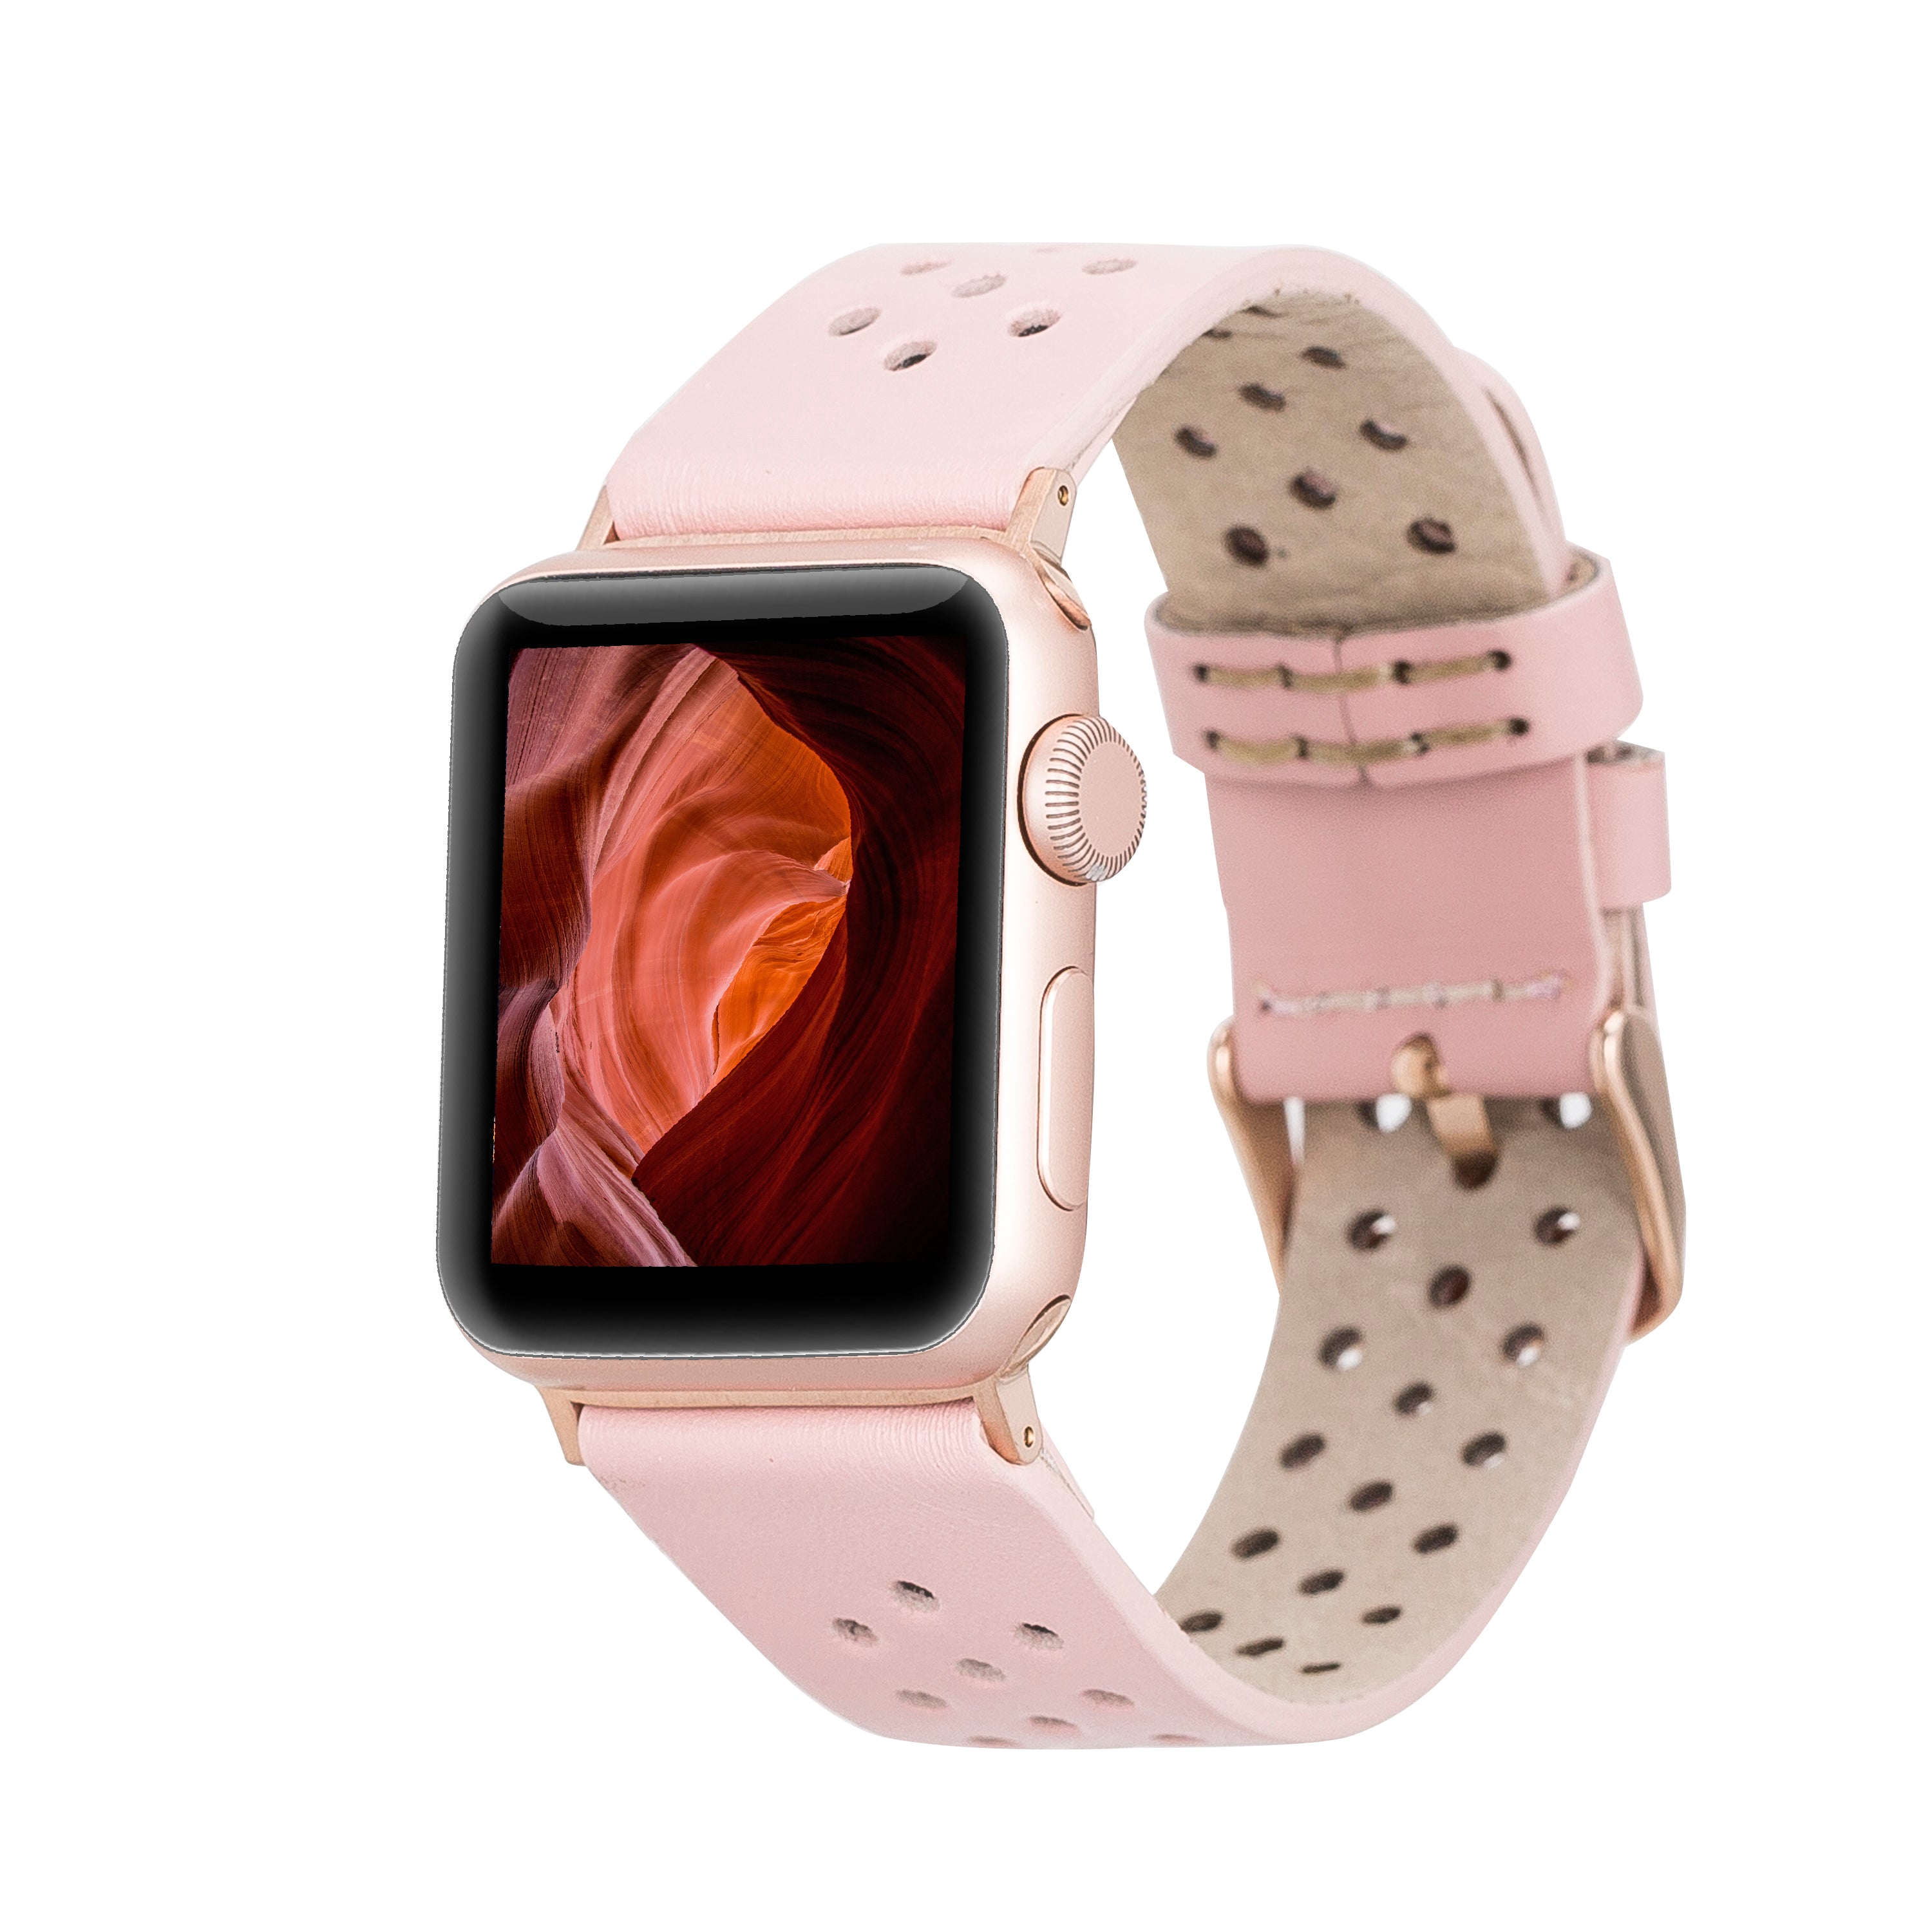 DelfiCase Chester Watch Band for Apple Watch & Fitbit Versa/Sense (Pink) 1